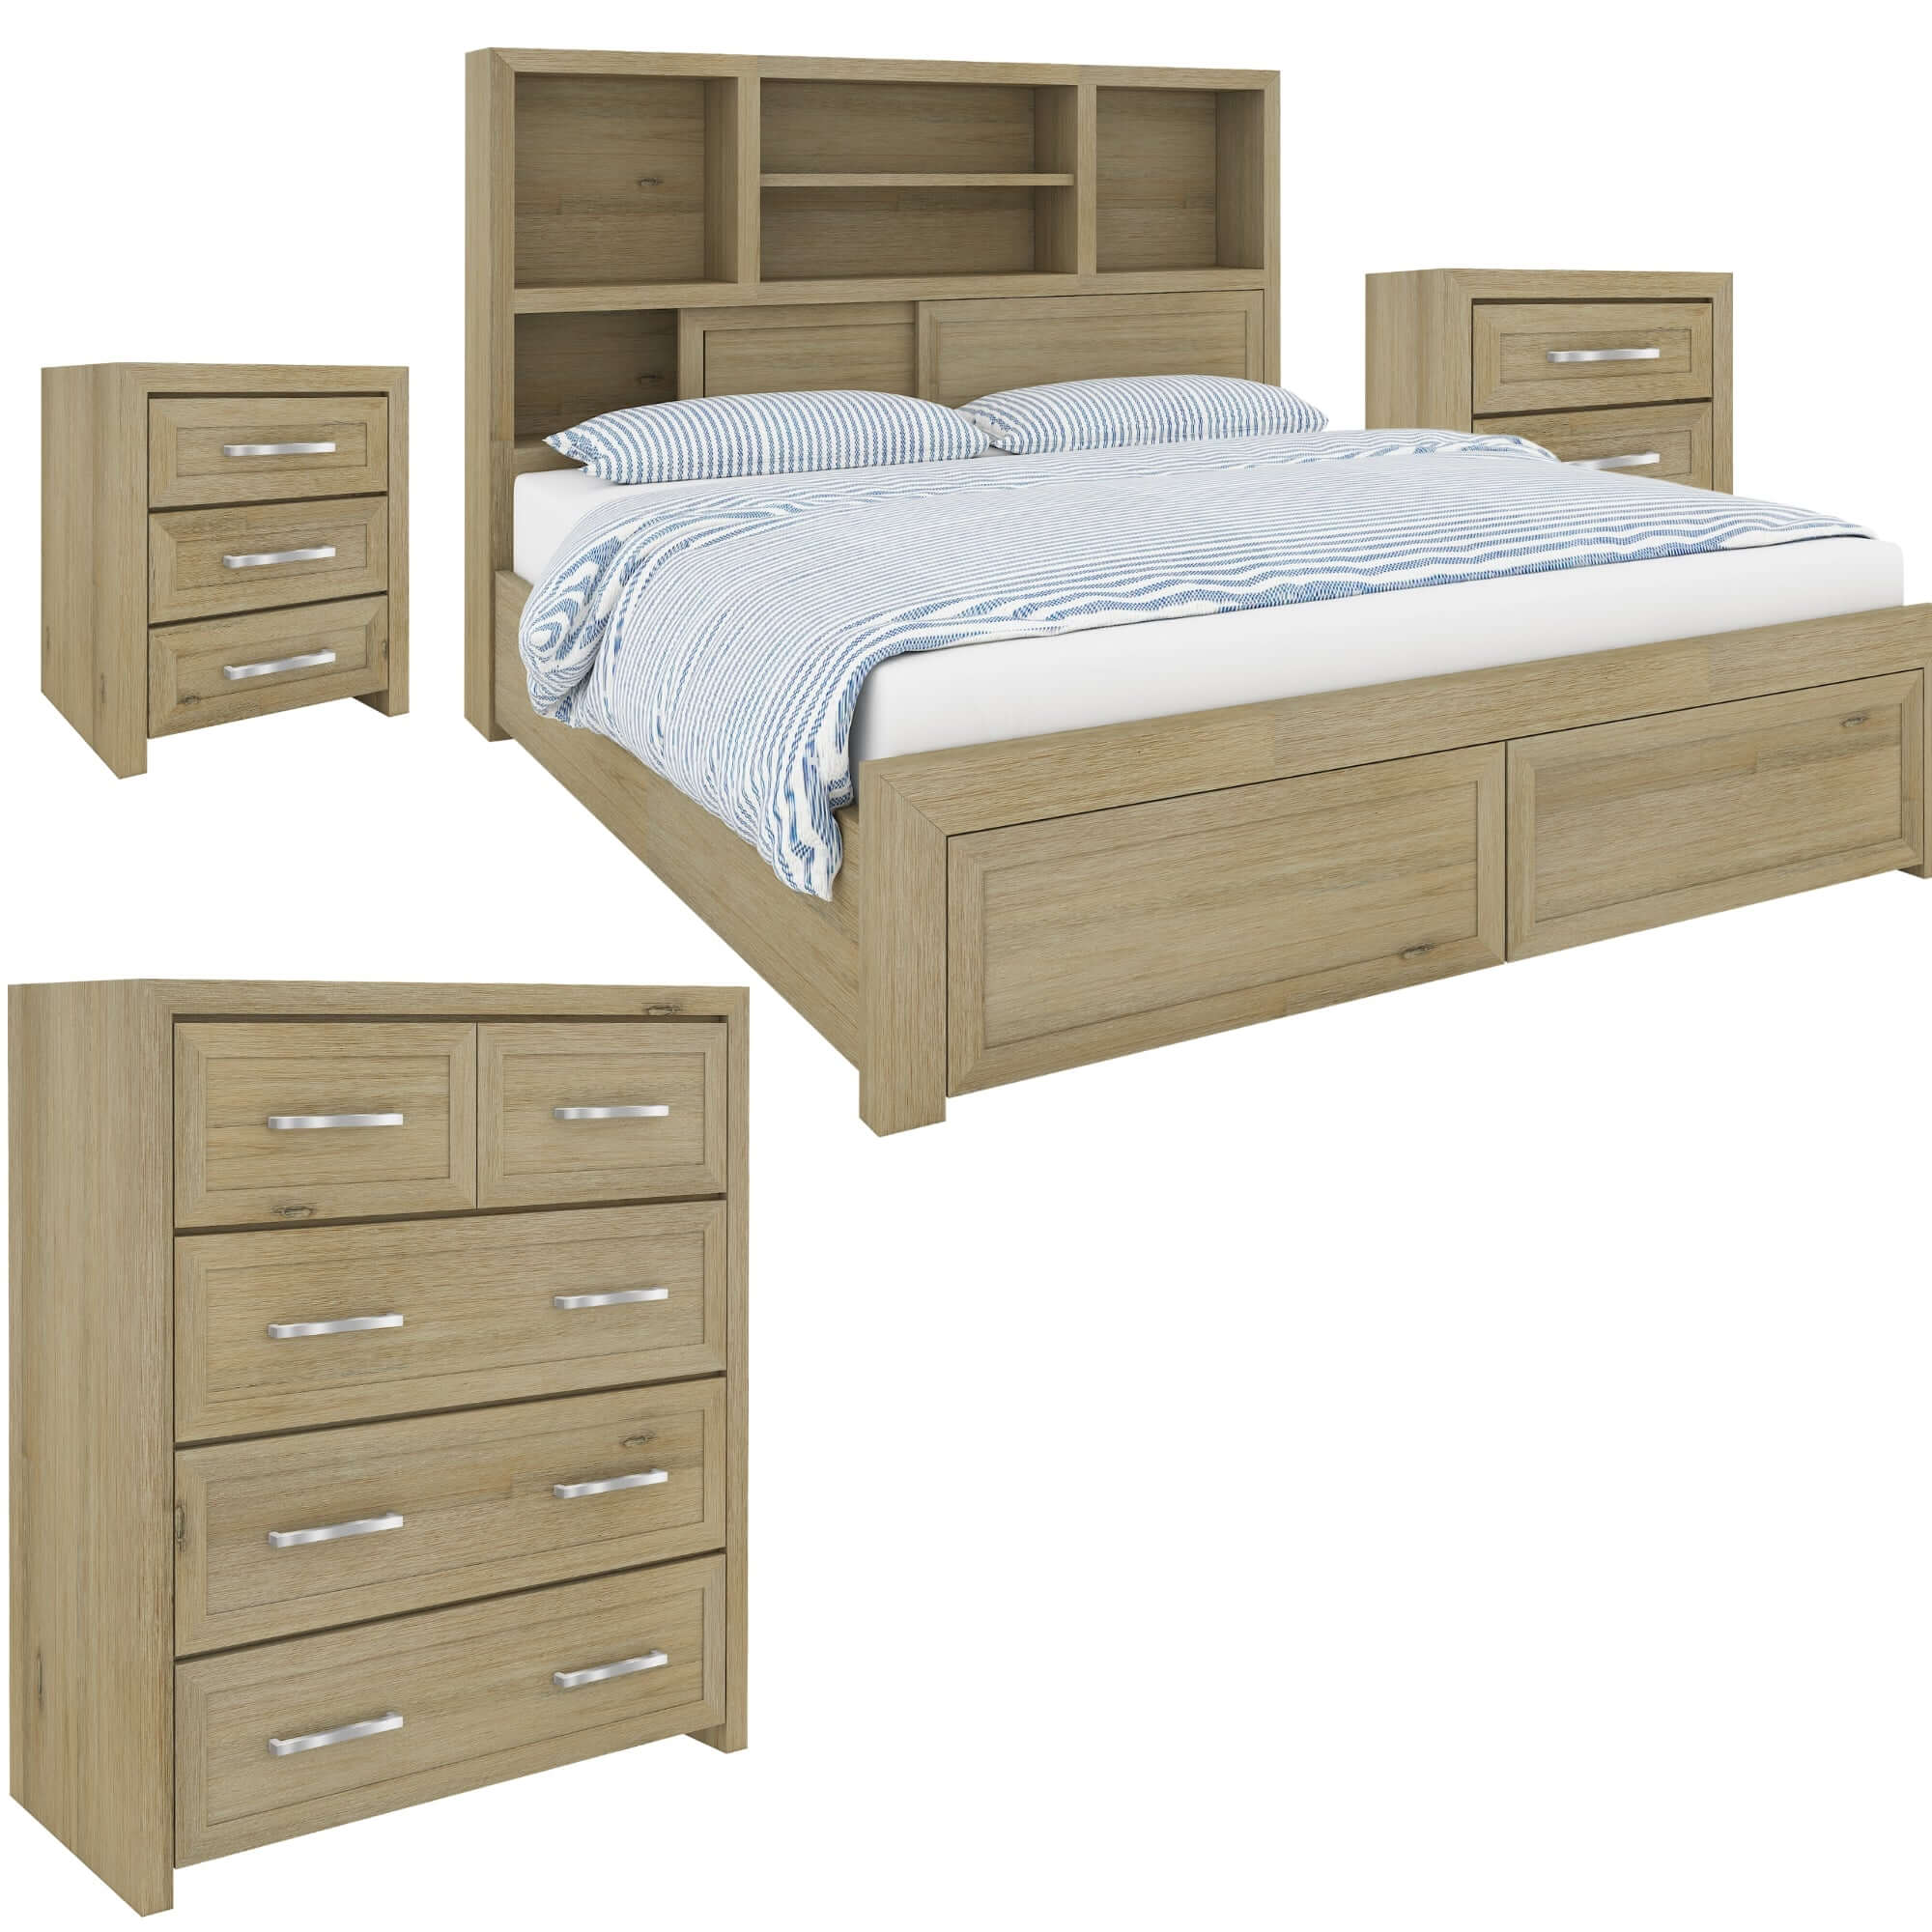 Gracelyn King Bed Frame Solid Wood Mattress Base With Storage Drawers - Smoke-Upinteriors